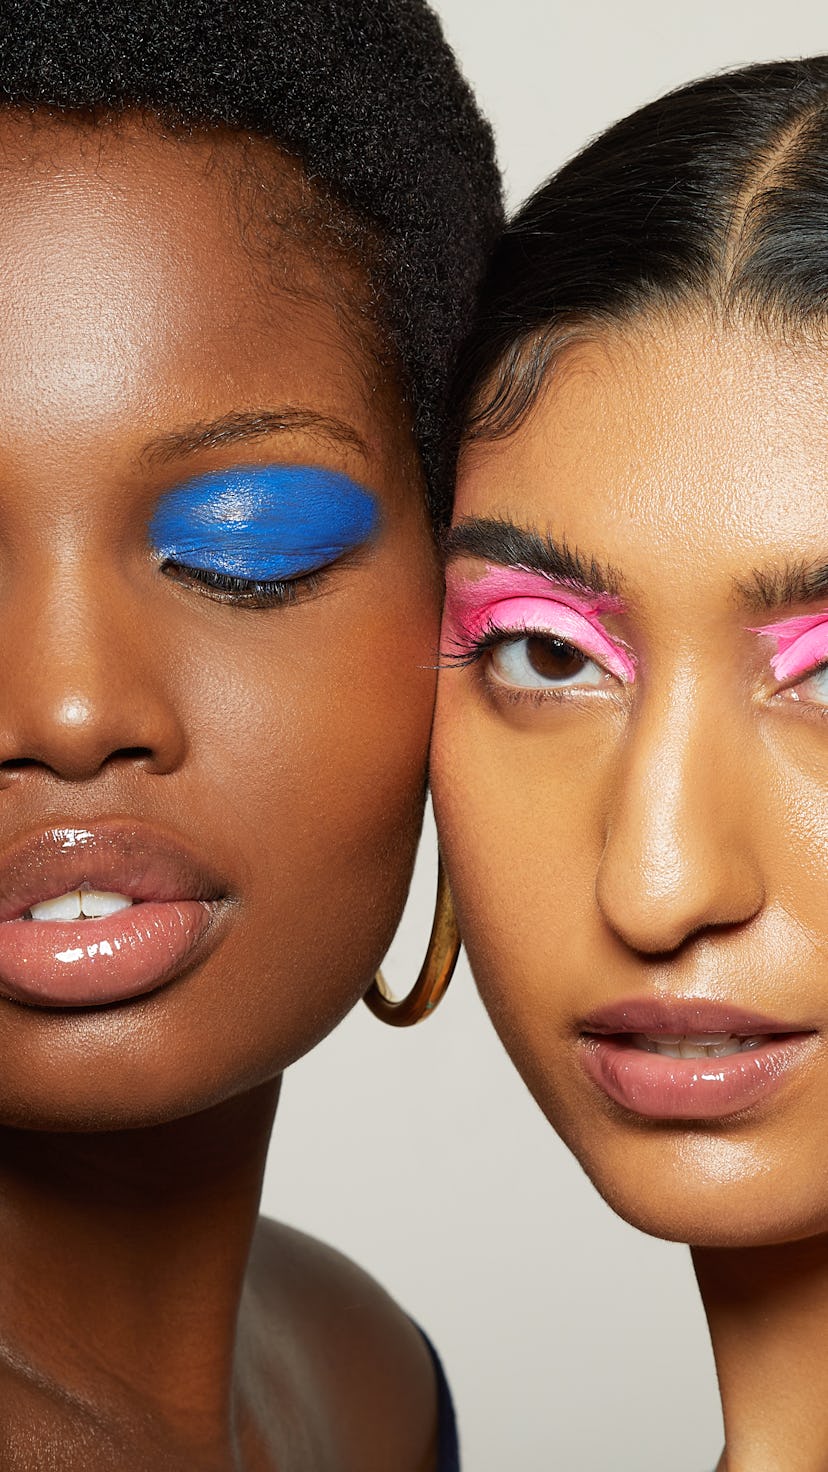 Two girls, one with blue eye shadow and the other with pink mono eyes shadow